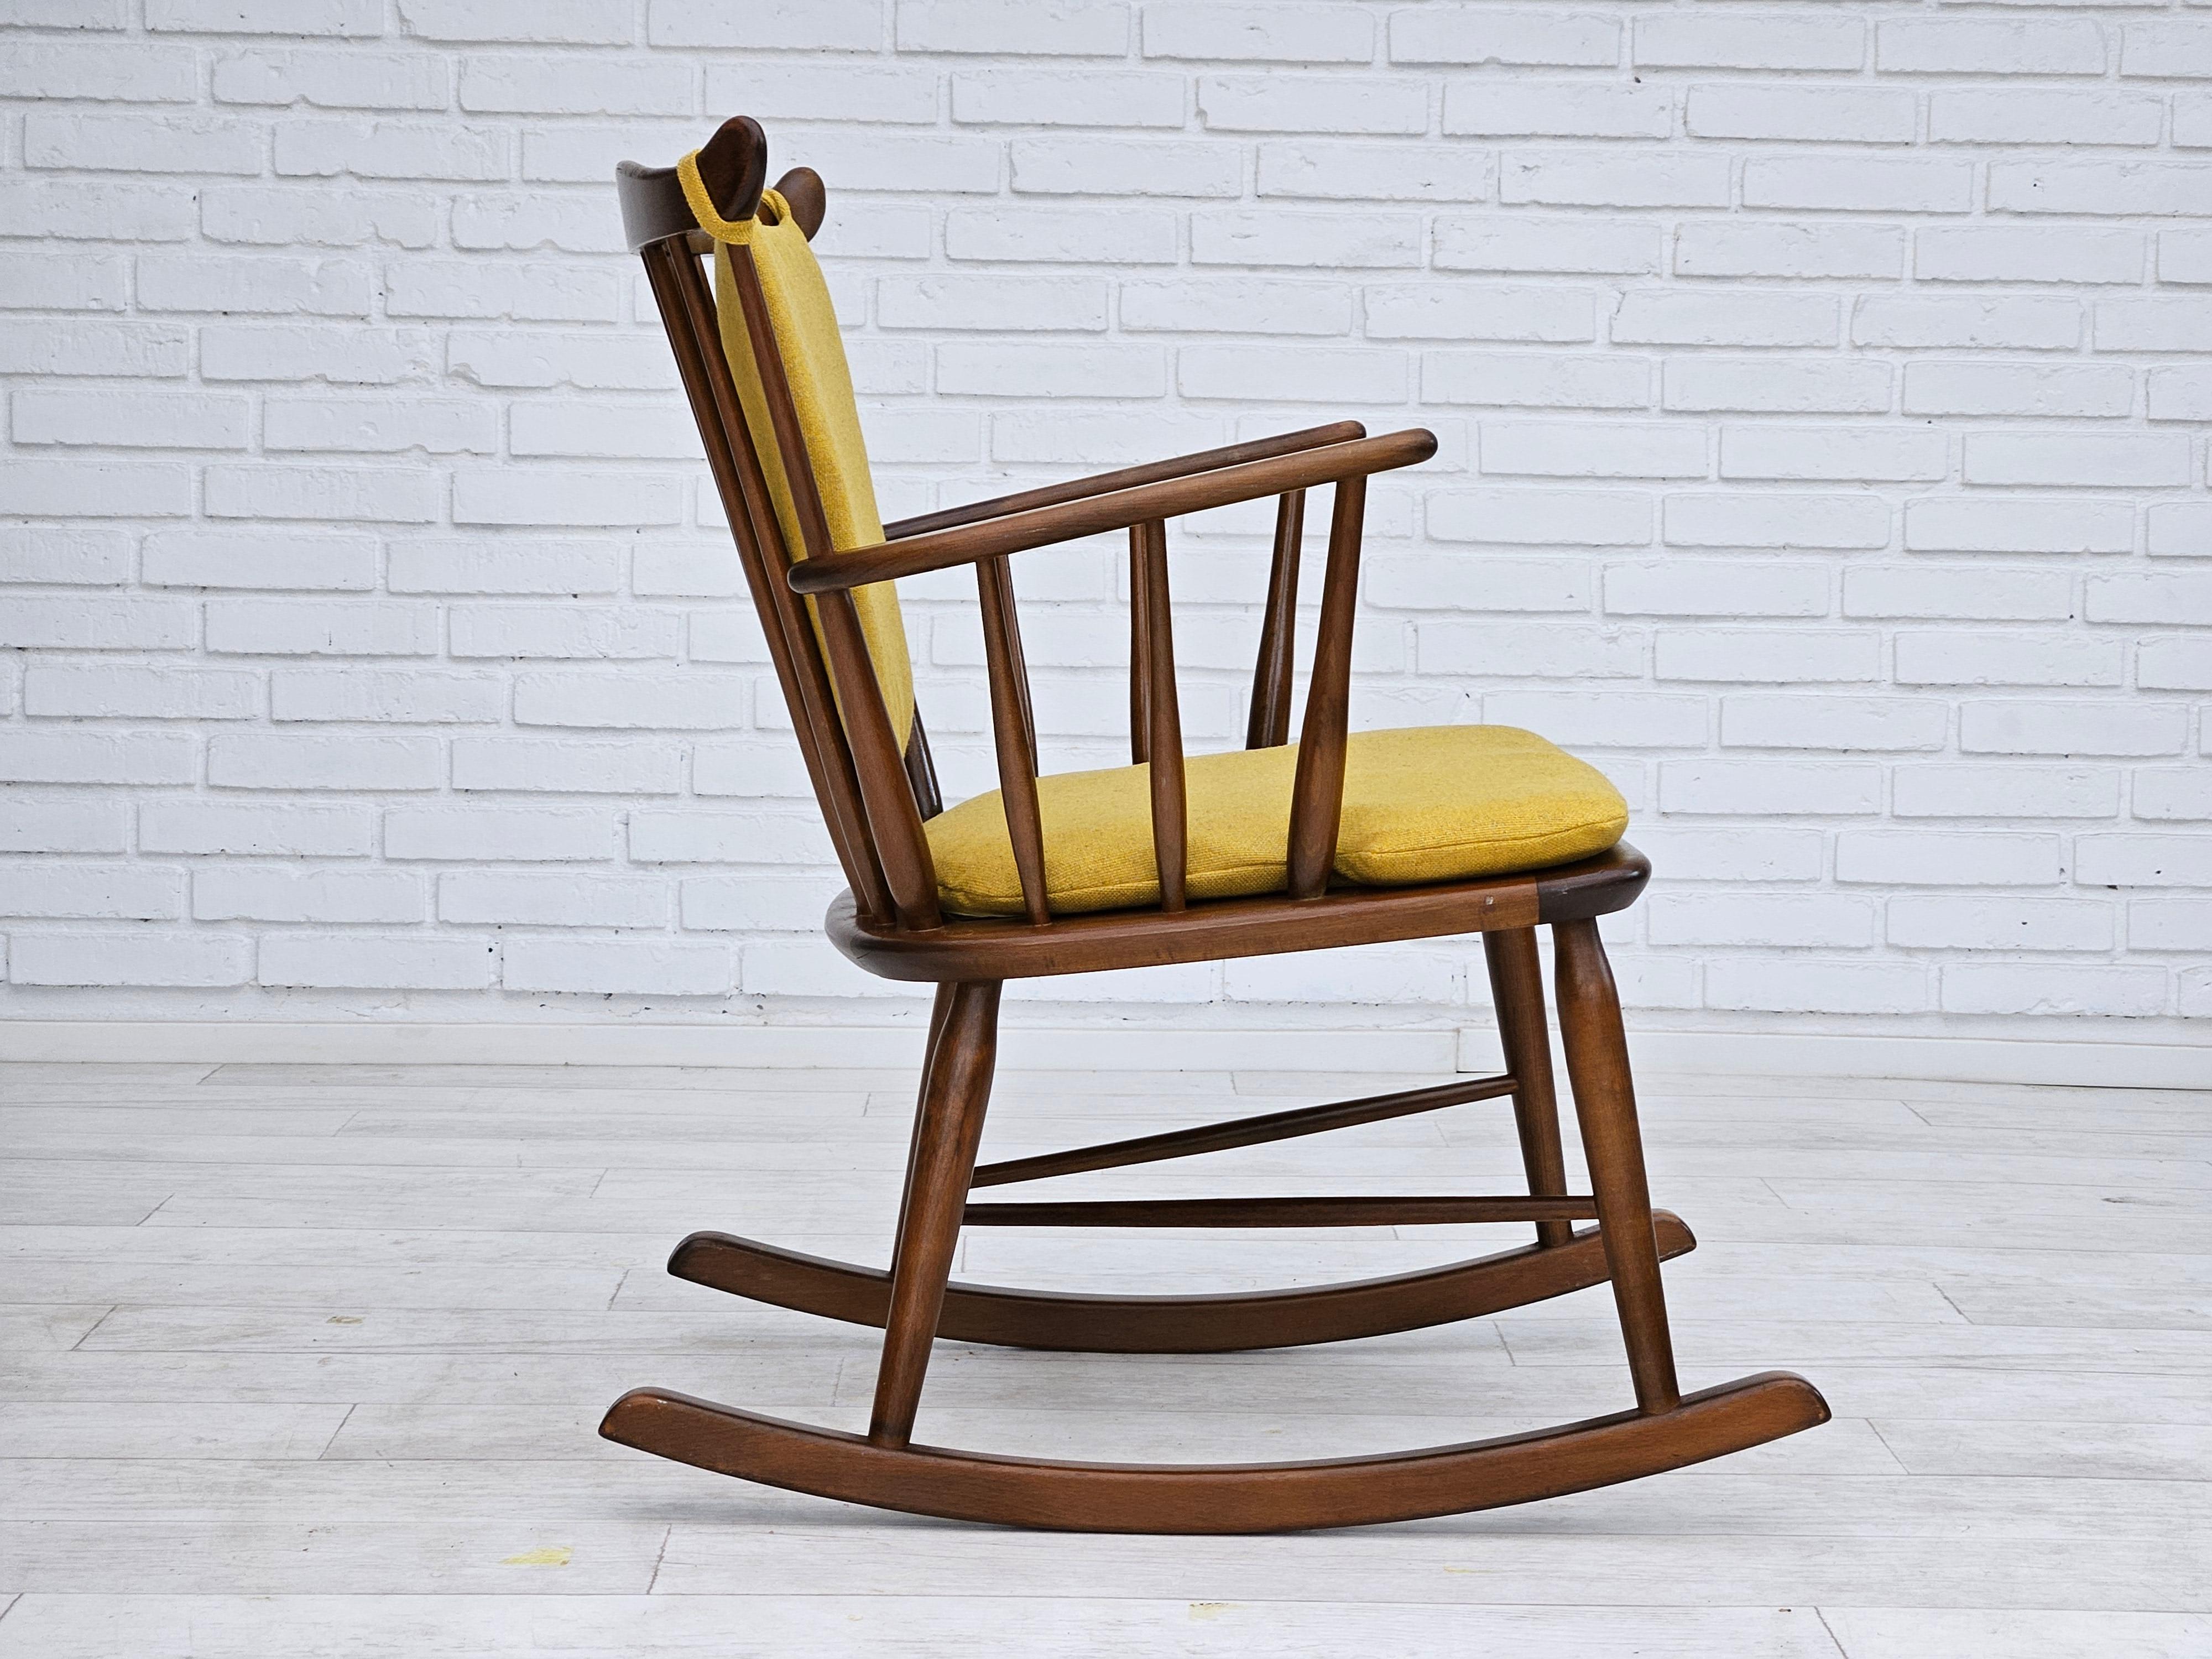 Mid-20th Century 1960-70s, Danish design by Farstrup Stolefabrik, reupholstered rocking chair. For Sale